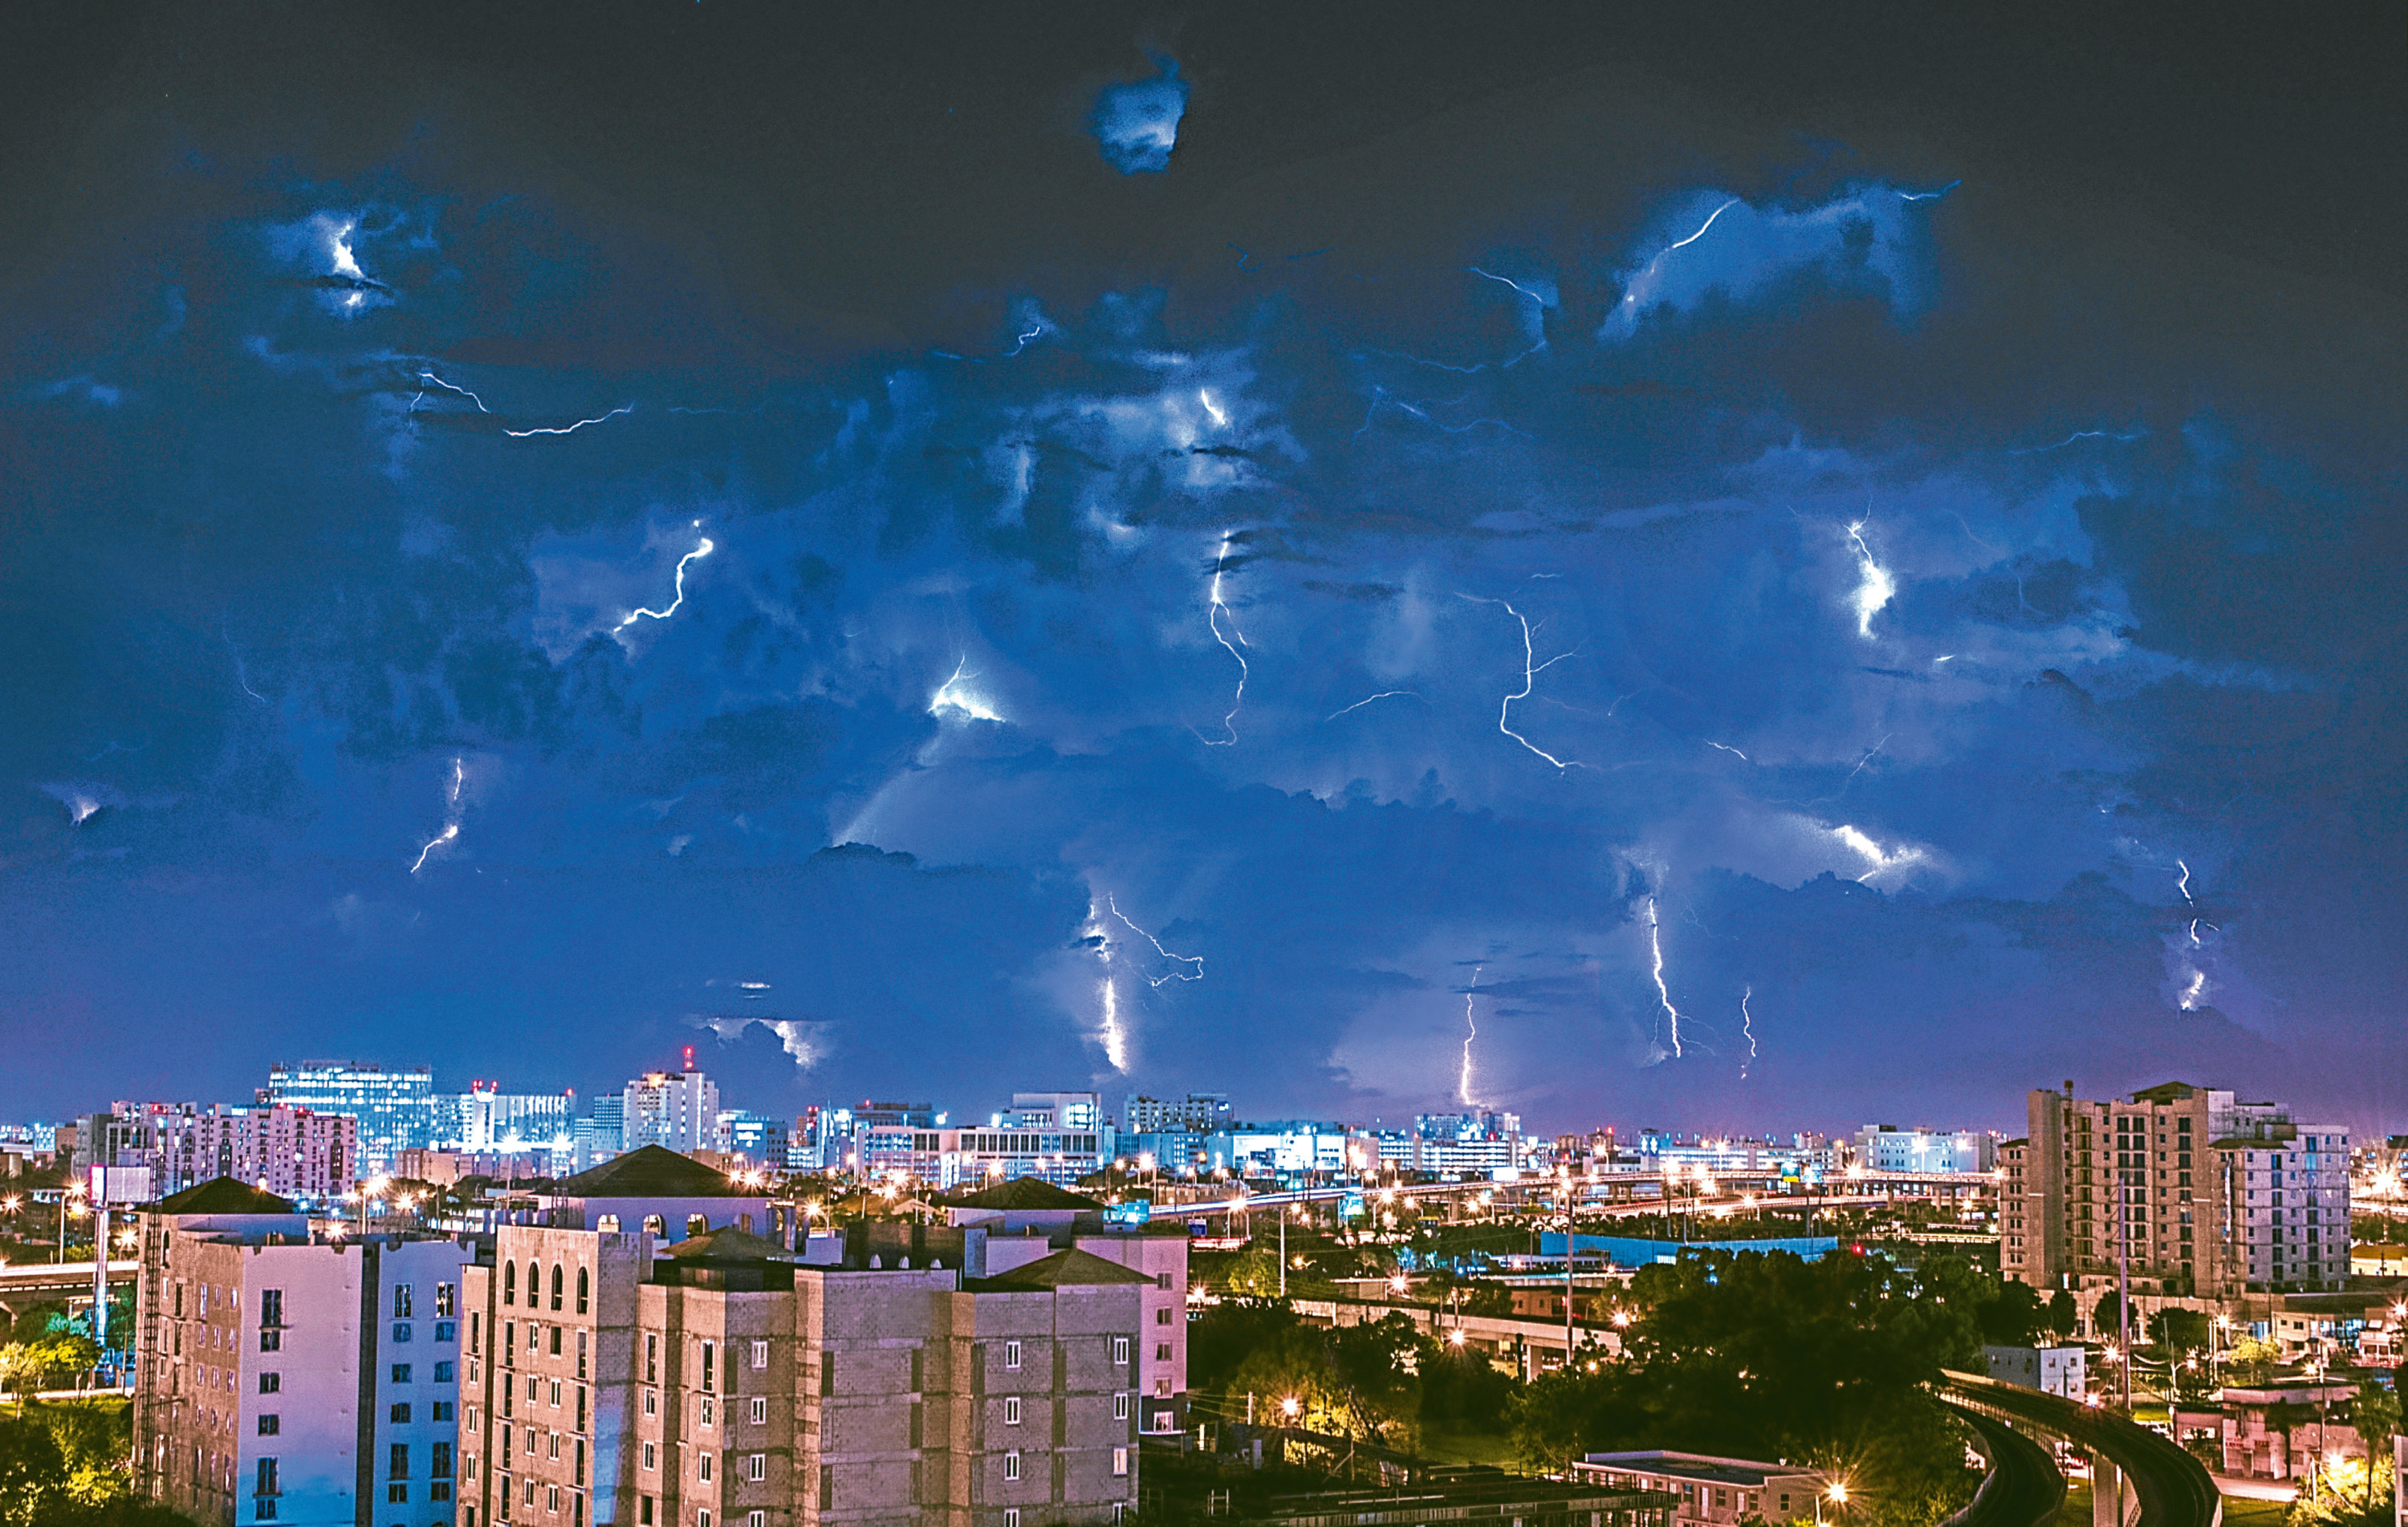 Electrical storm over Miami (Getty Images)